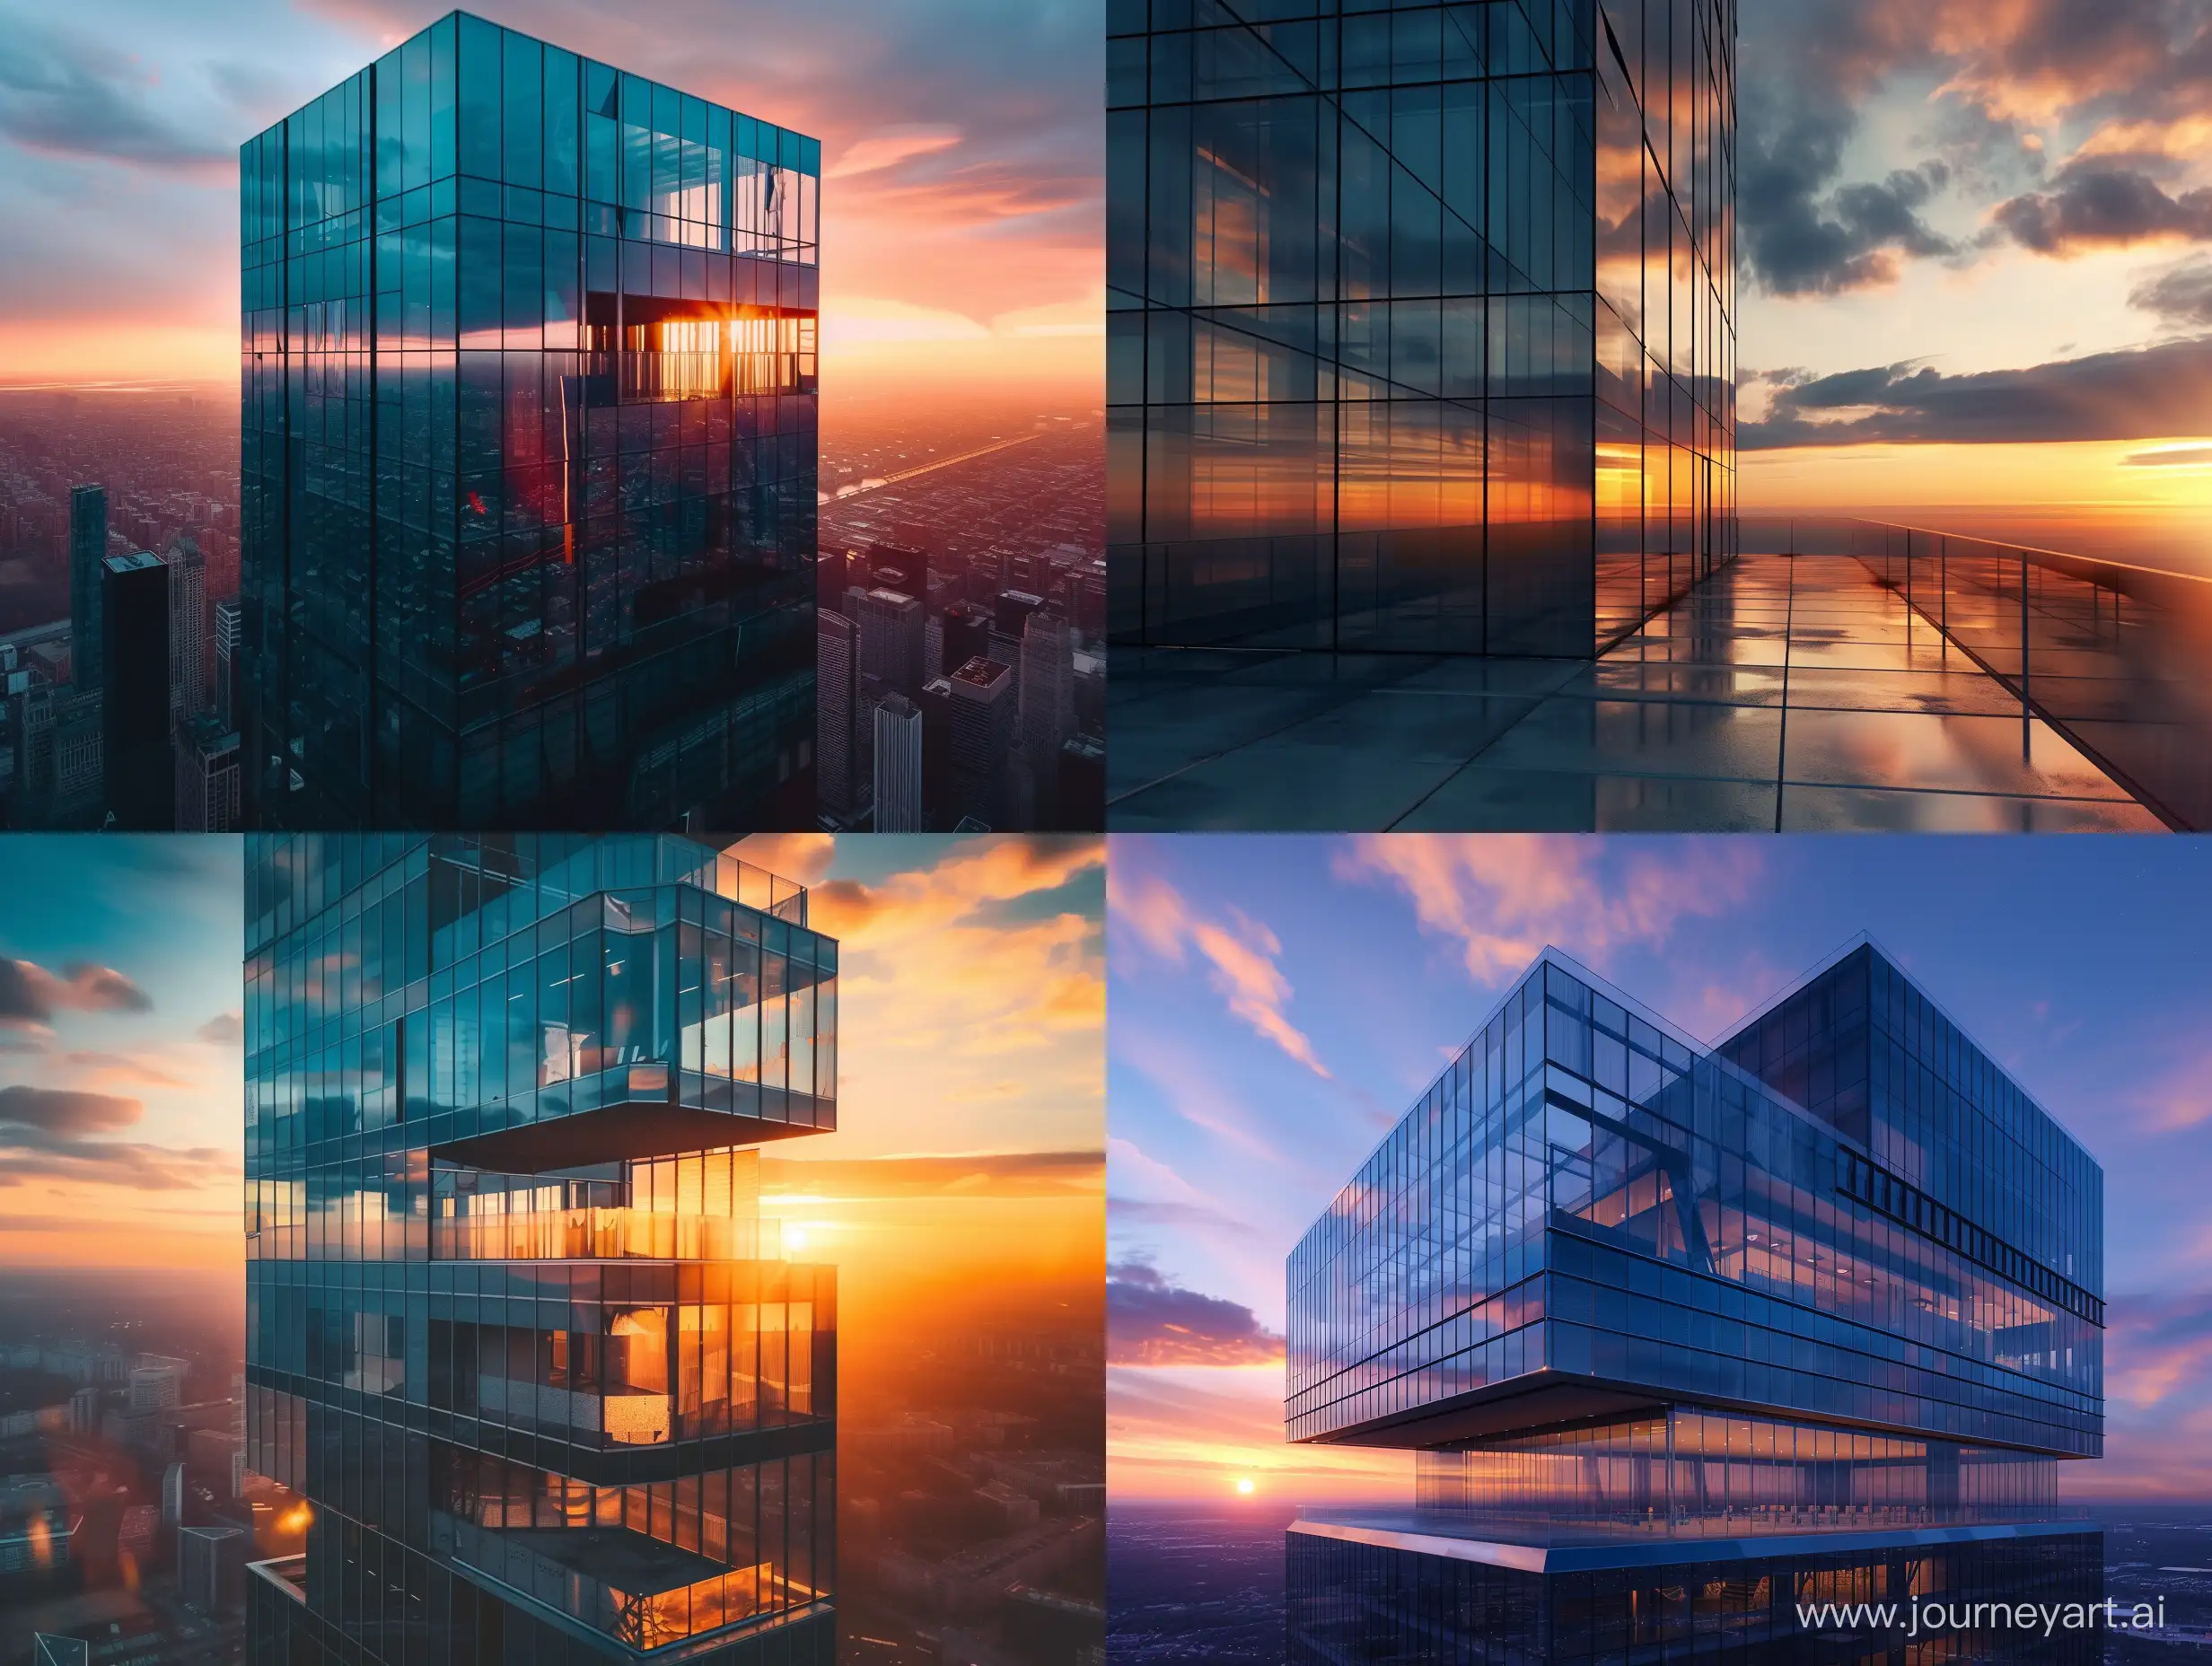 A cinematic photo of an abandoned modern glass skyscraper at sunset